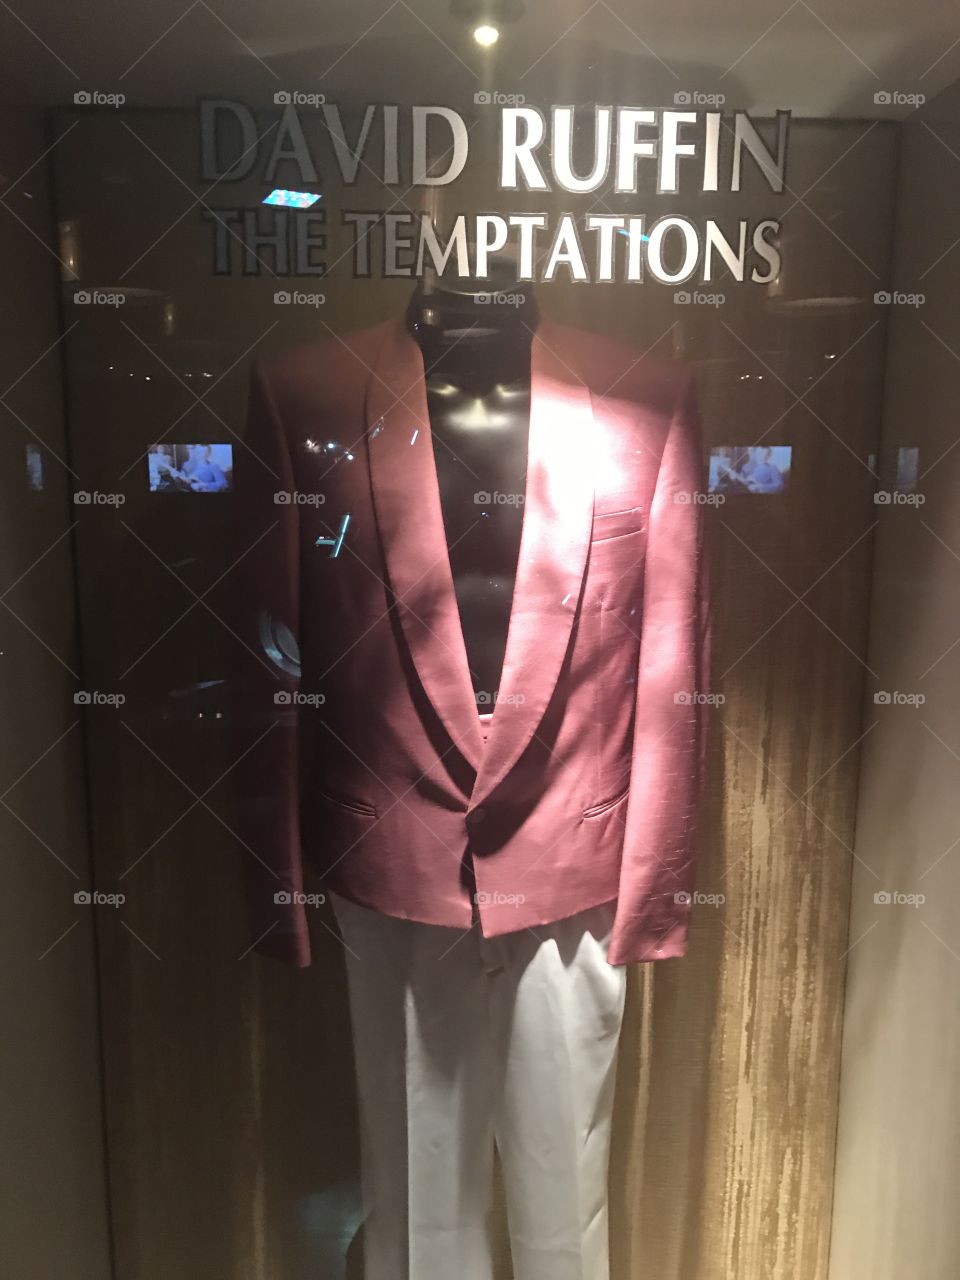 Pic of a Suit worn by a member of the old Temptations band